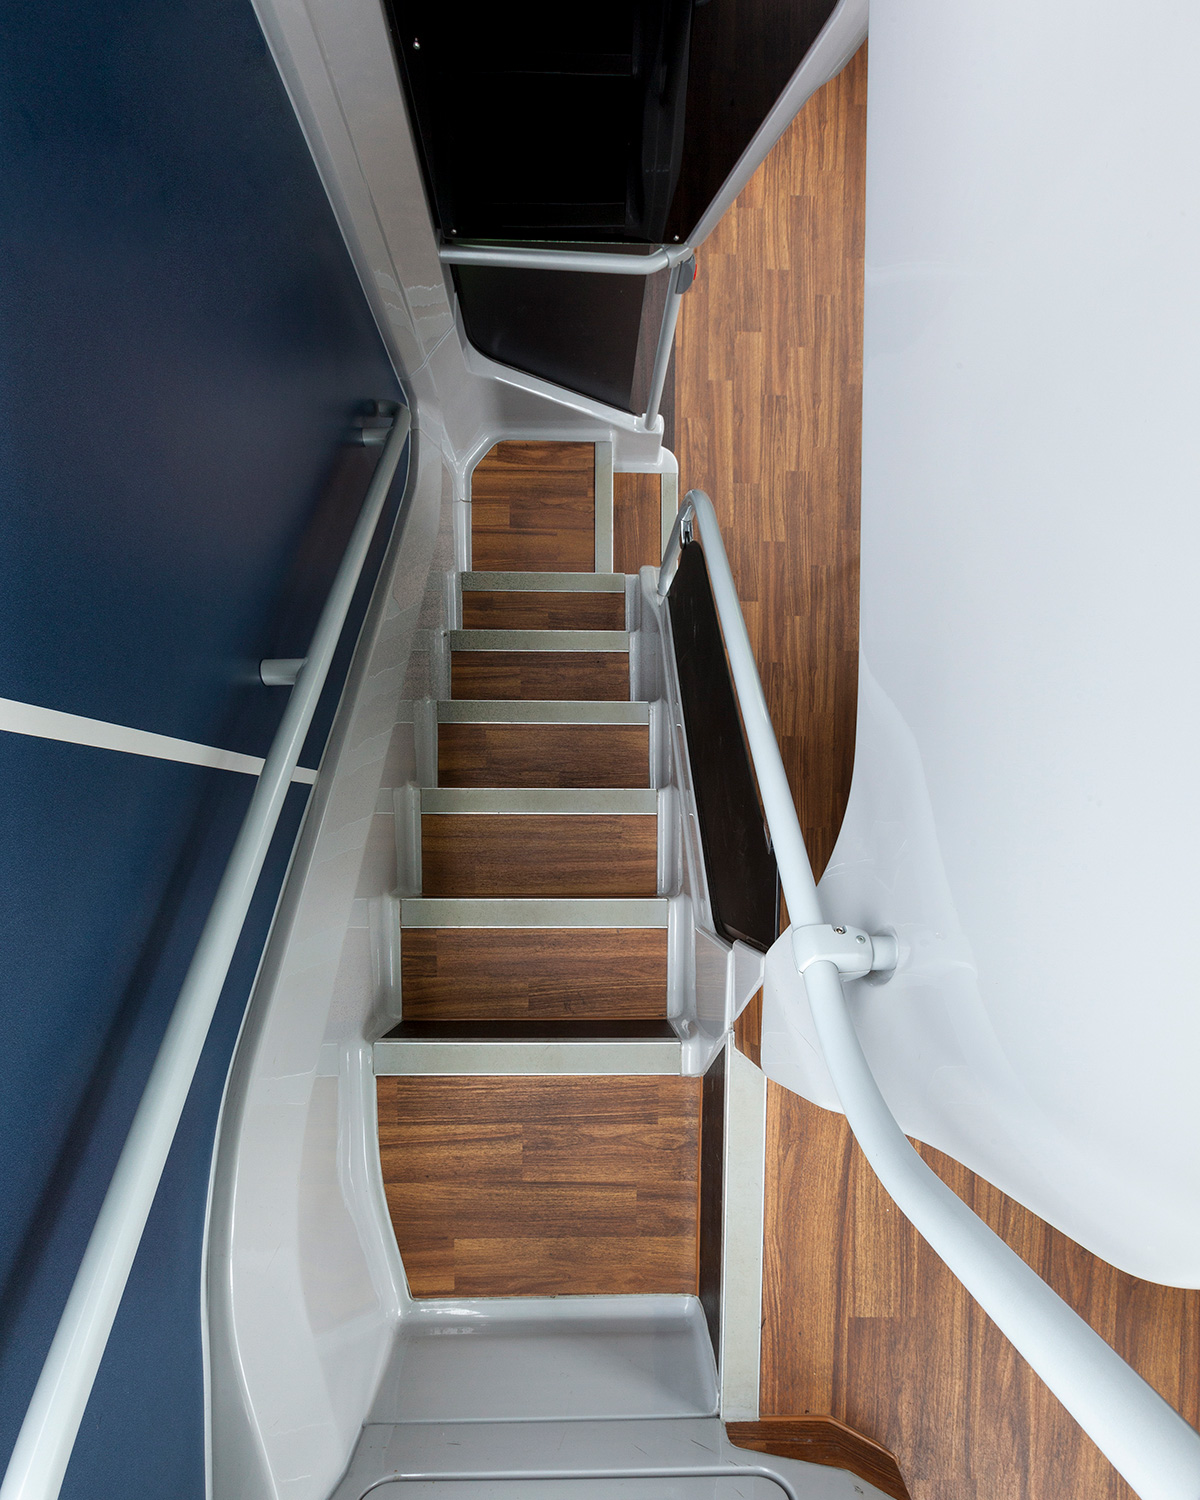 Altro Transflor Wood installed on the stairwell of a Reading Buses bus